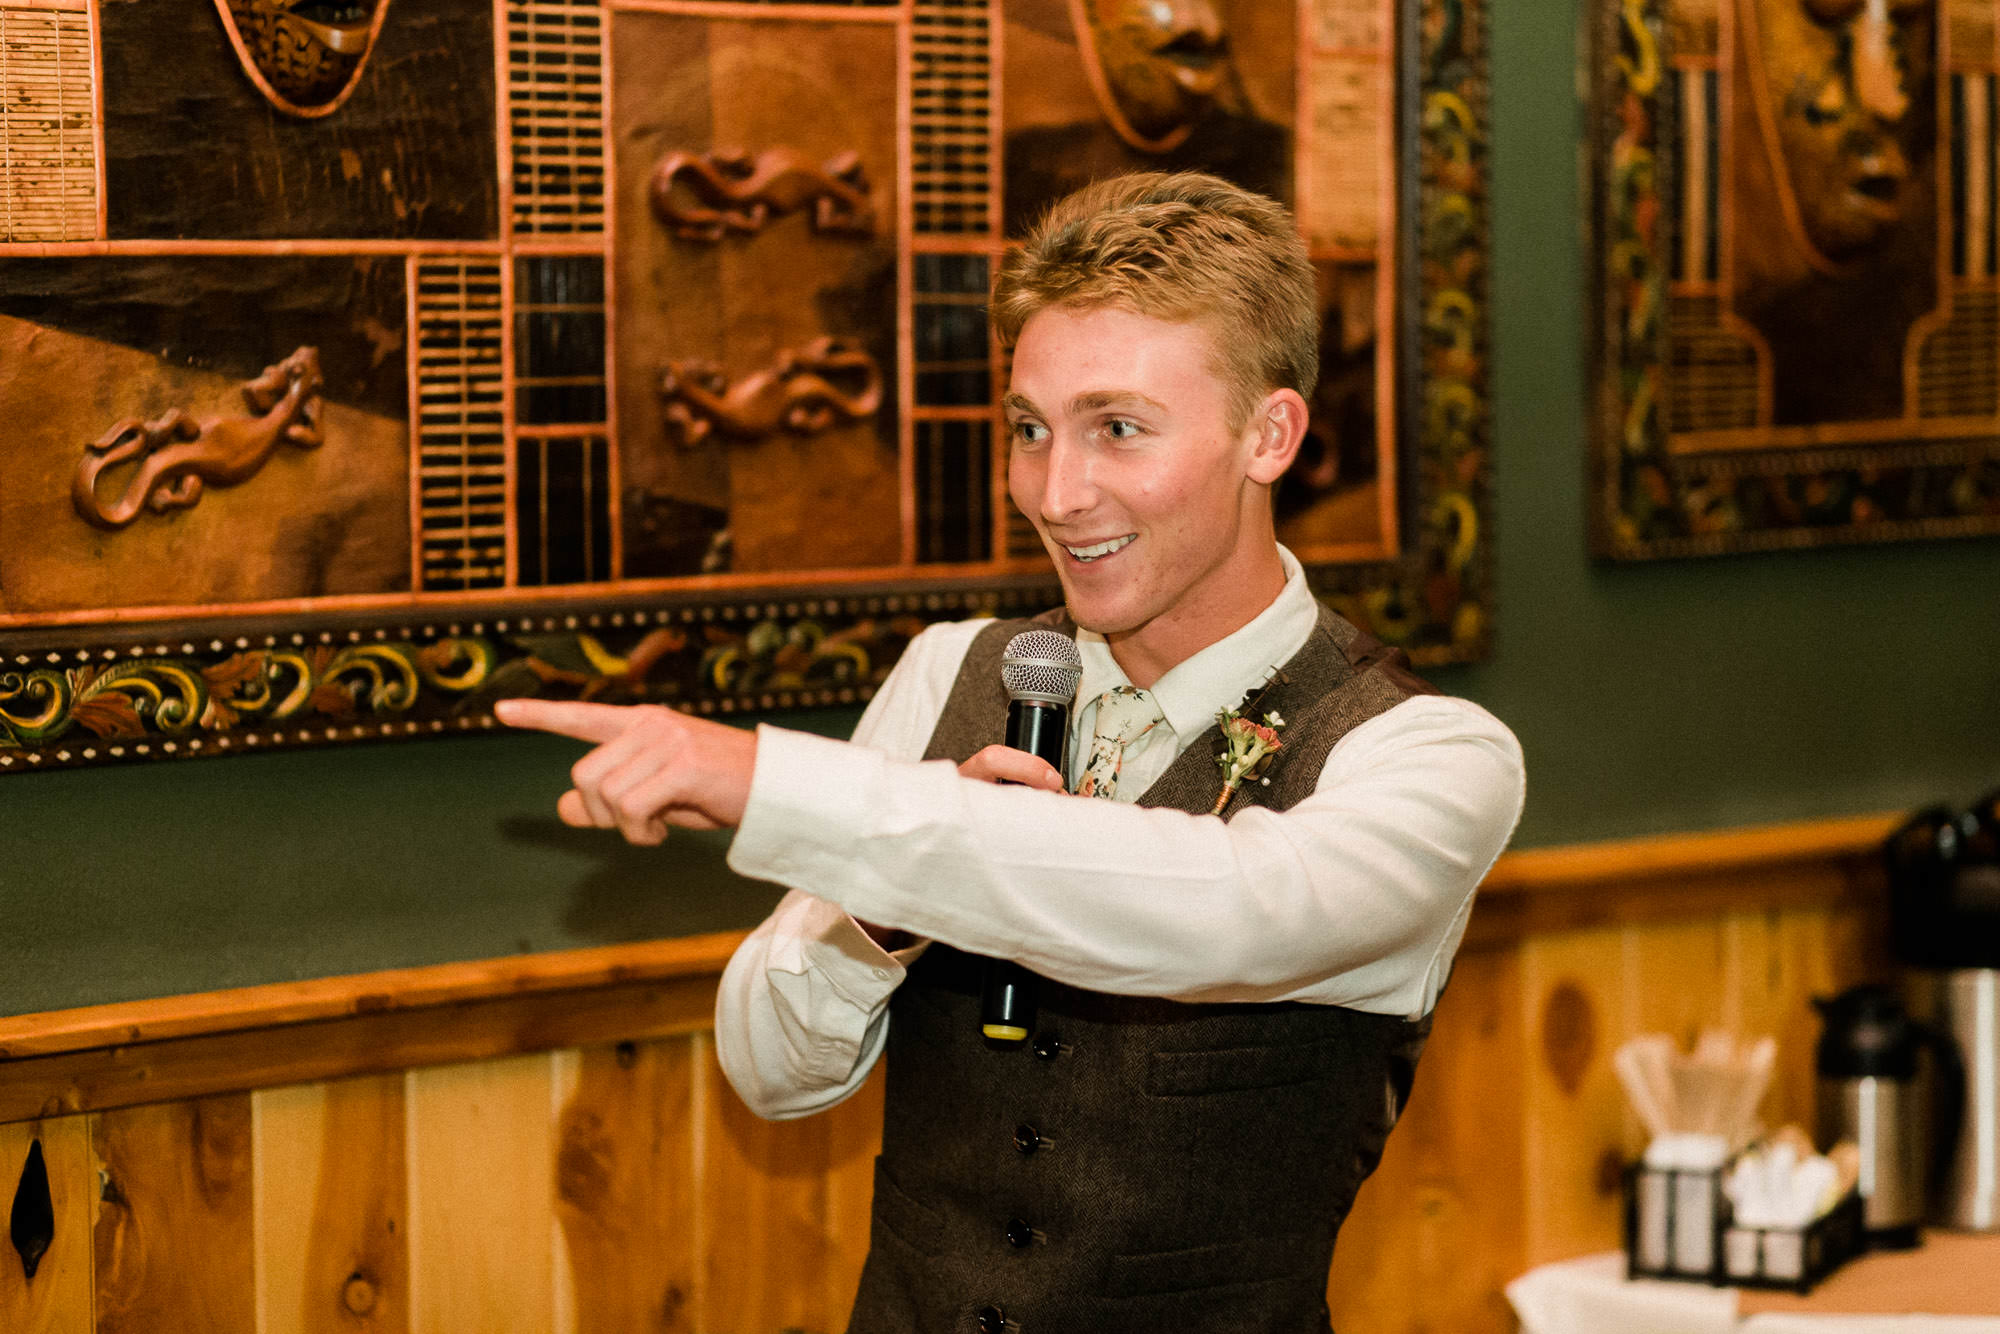 Bride's brother gives toast at wedding reception at McMenamin's in Bend, Oregon